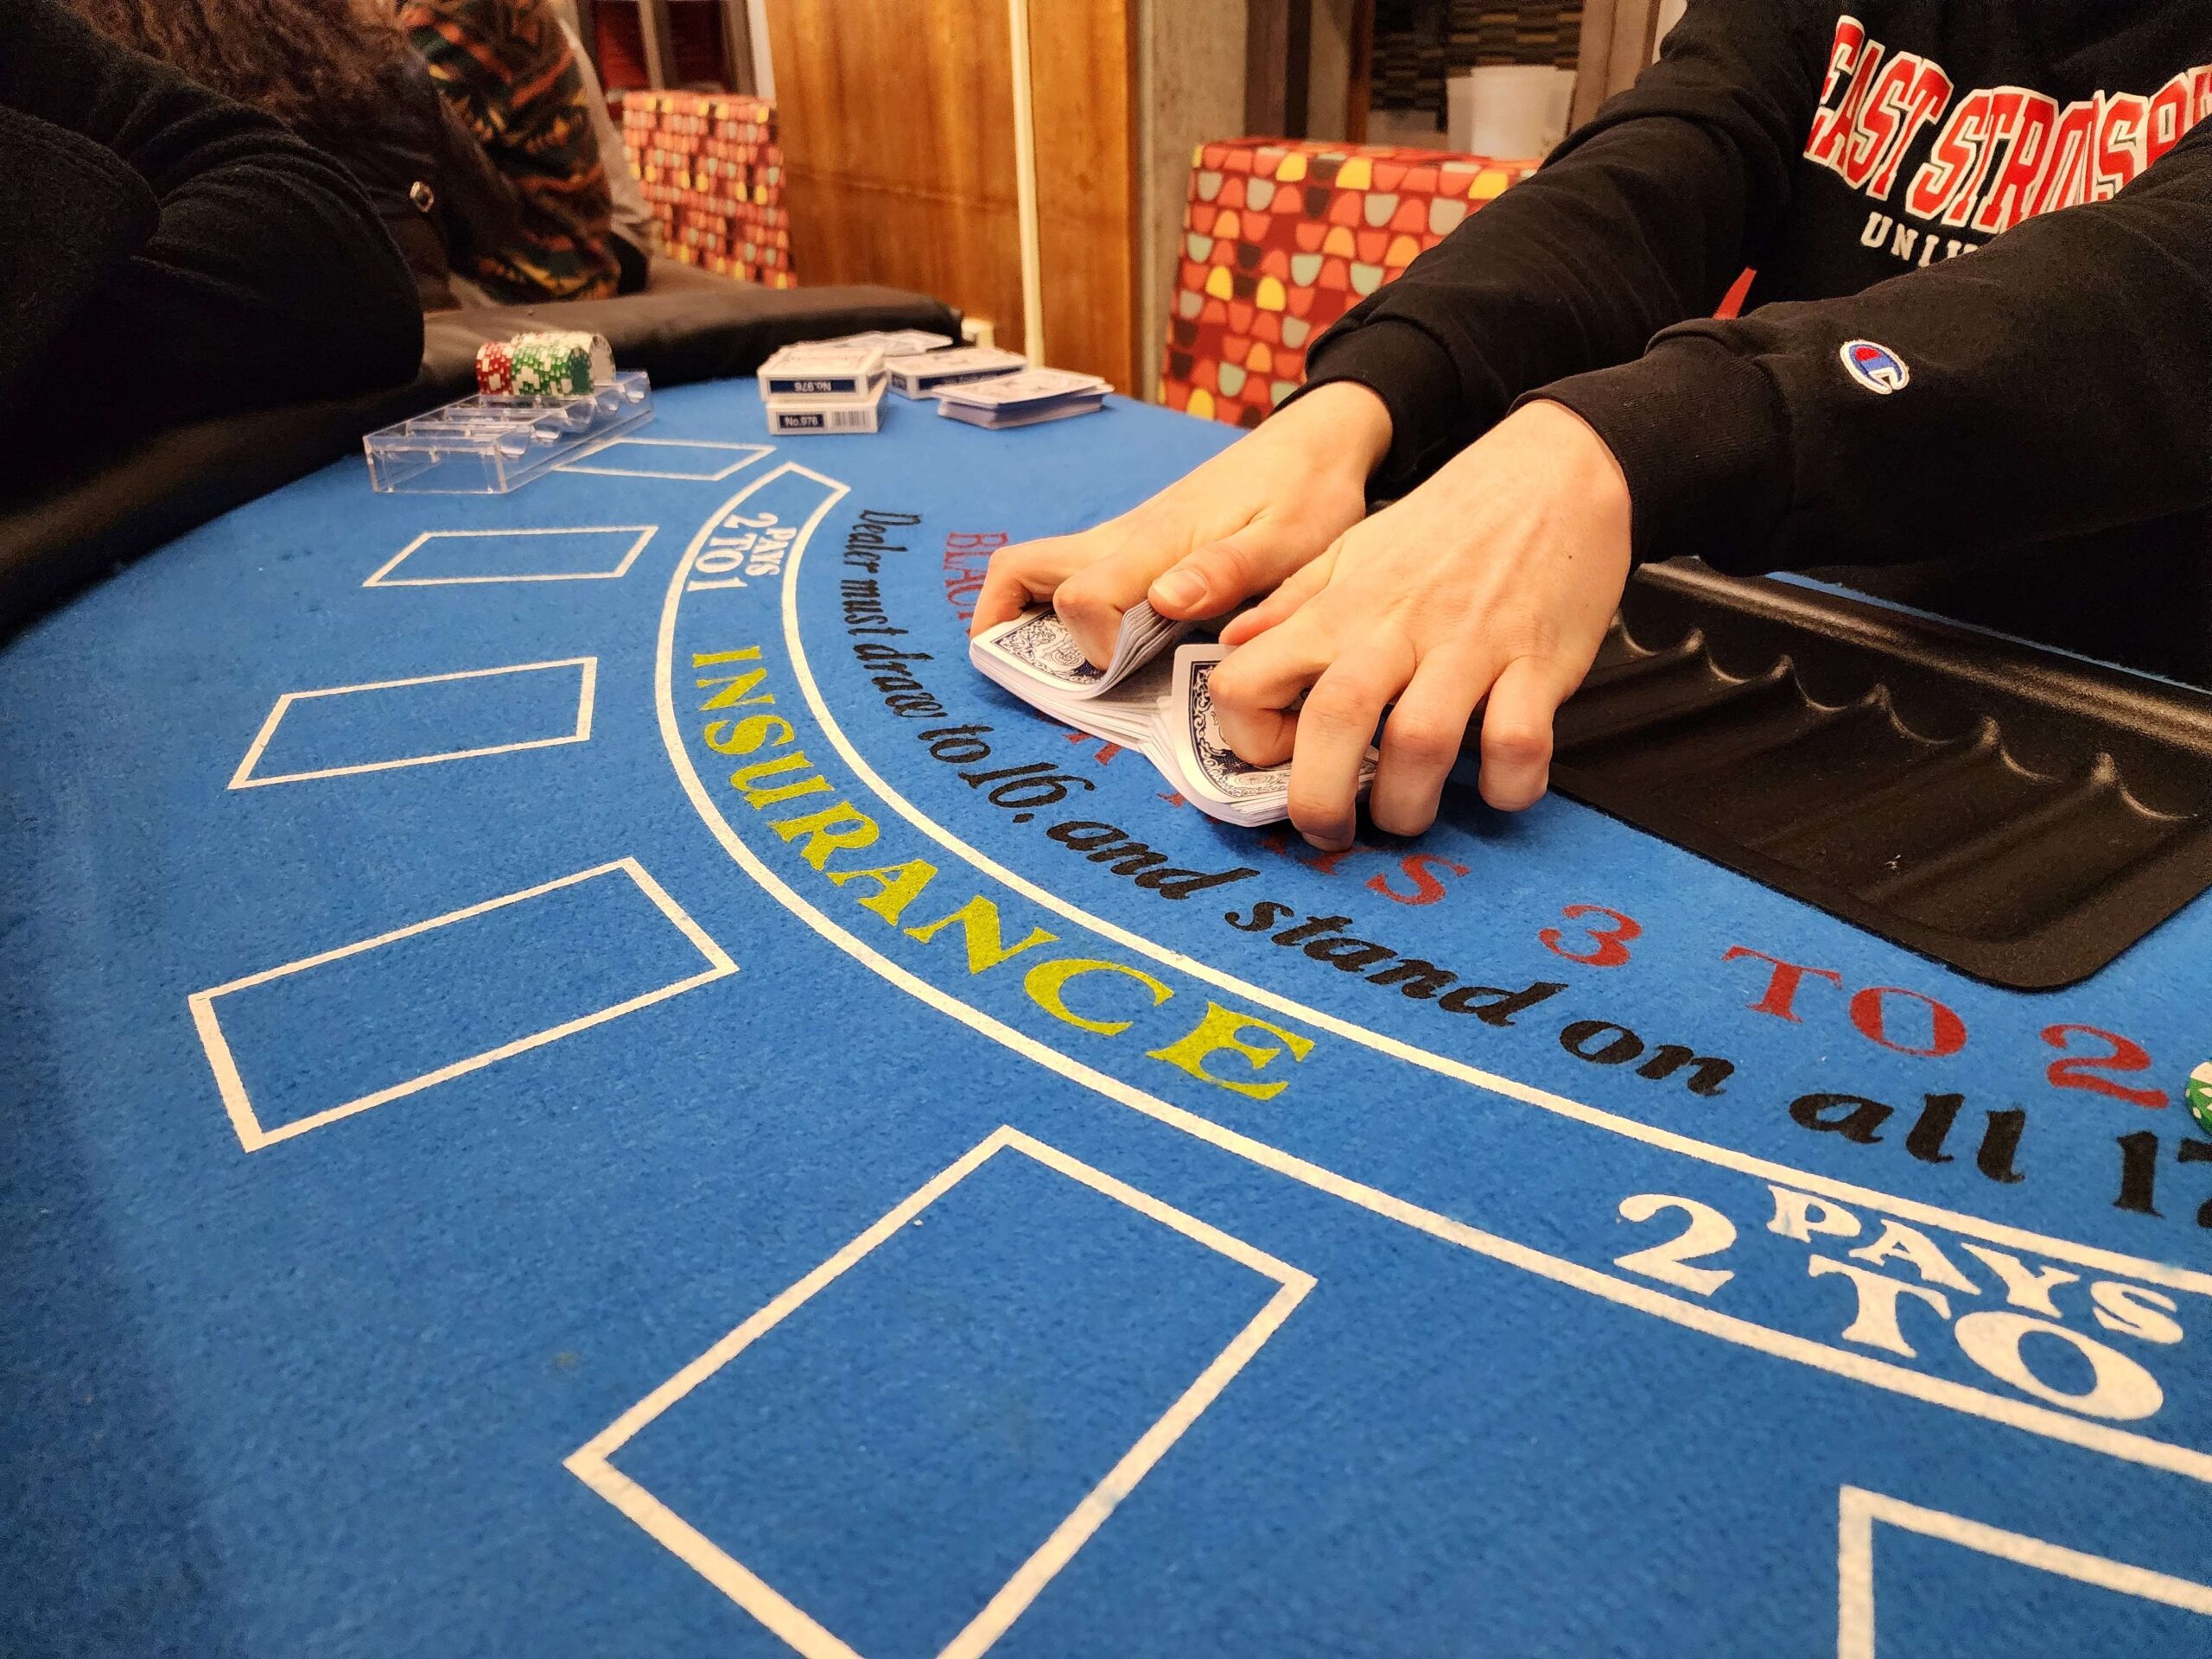 Cards being shuffled on blackjack table